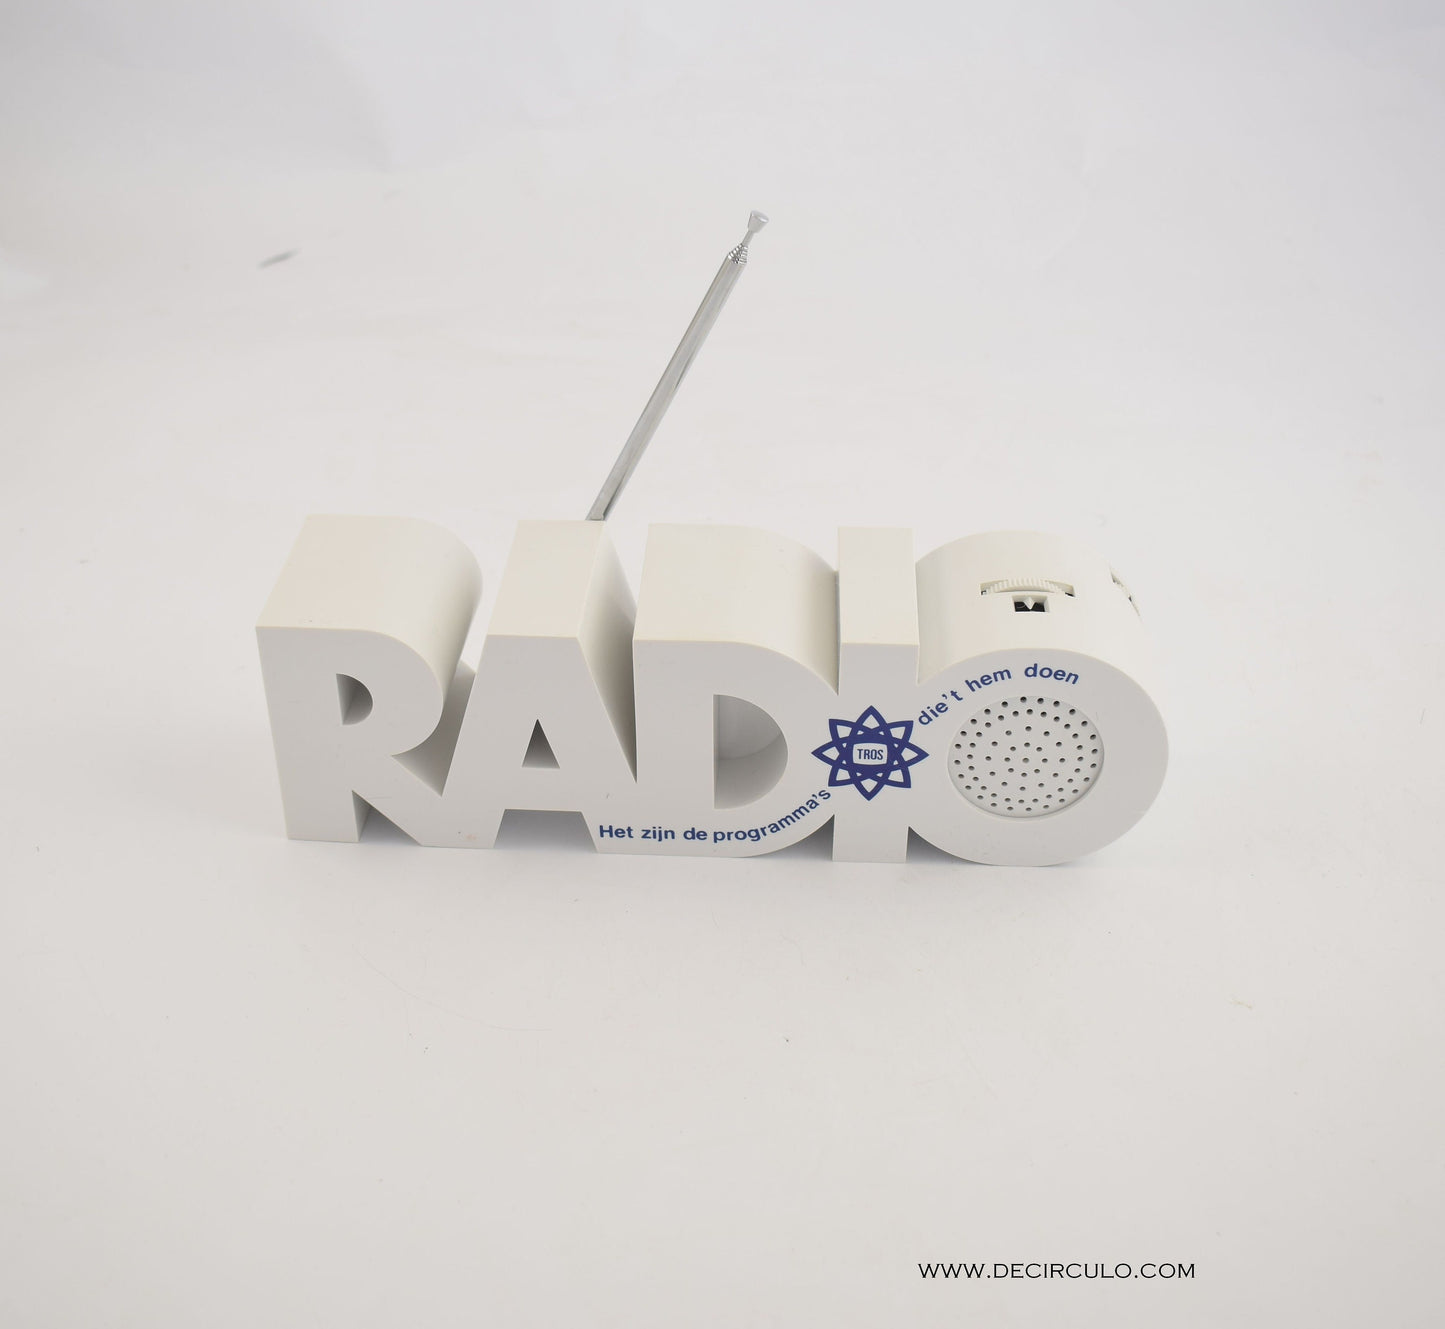 Radio radio Model in the form of the word radio AM and FM frequency